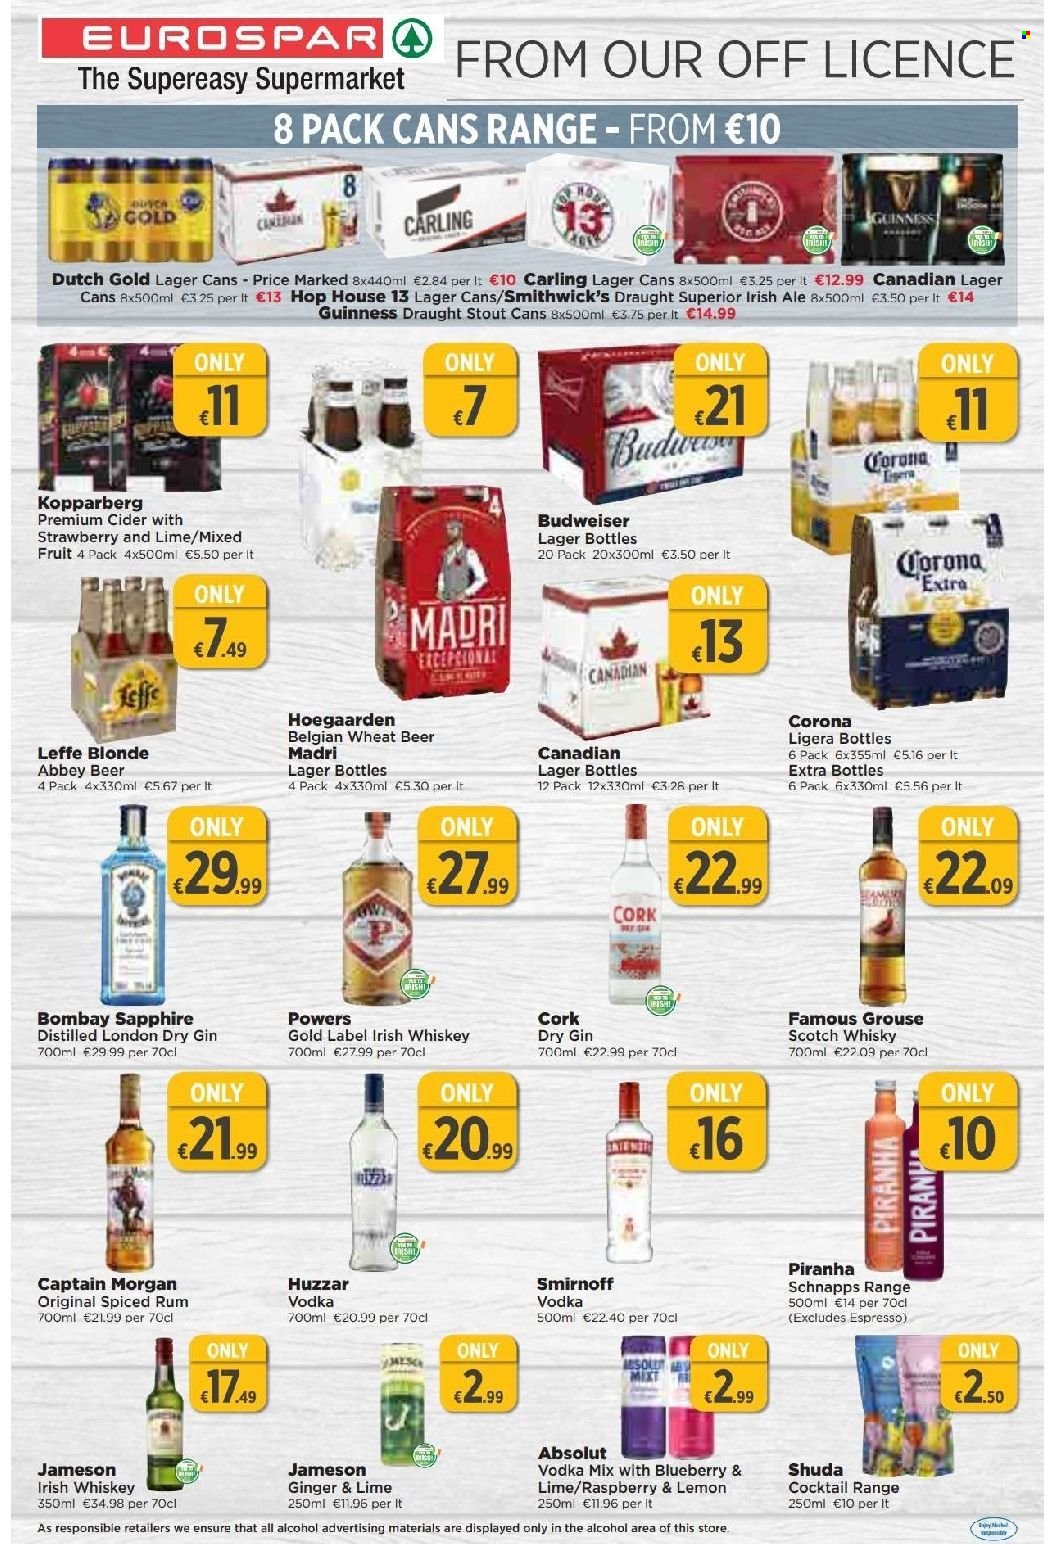 thumbnail - EUROSPAR offer  - 19.01.2023 - 08.02.2023 - Sales products - alcohol, Captain Morgan, gin, rum, schnapps, Smirnoff, spiced rum, vodka, whiskey, irish whiskey, Jameson, Absolut, Kopparberg, scotch whisky, whisky, cider, beer, Corona Extra, Guinness, Carling, Lager, Budweiser. Page 15.